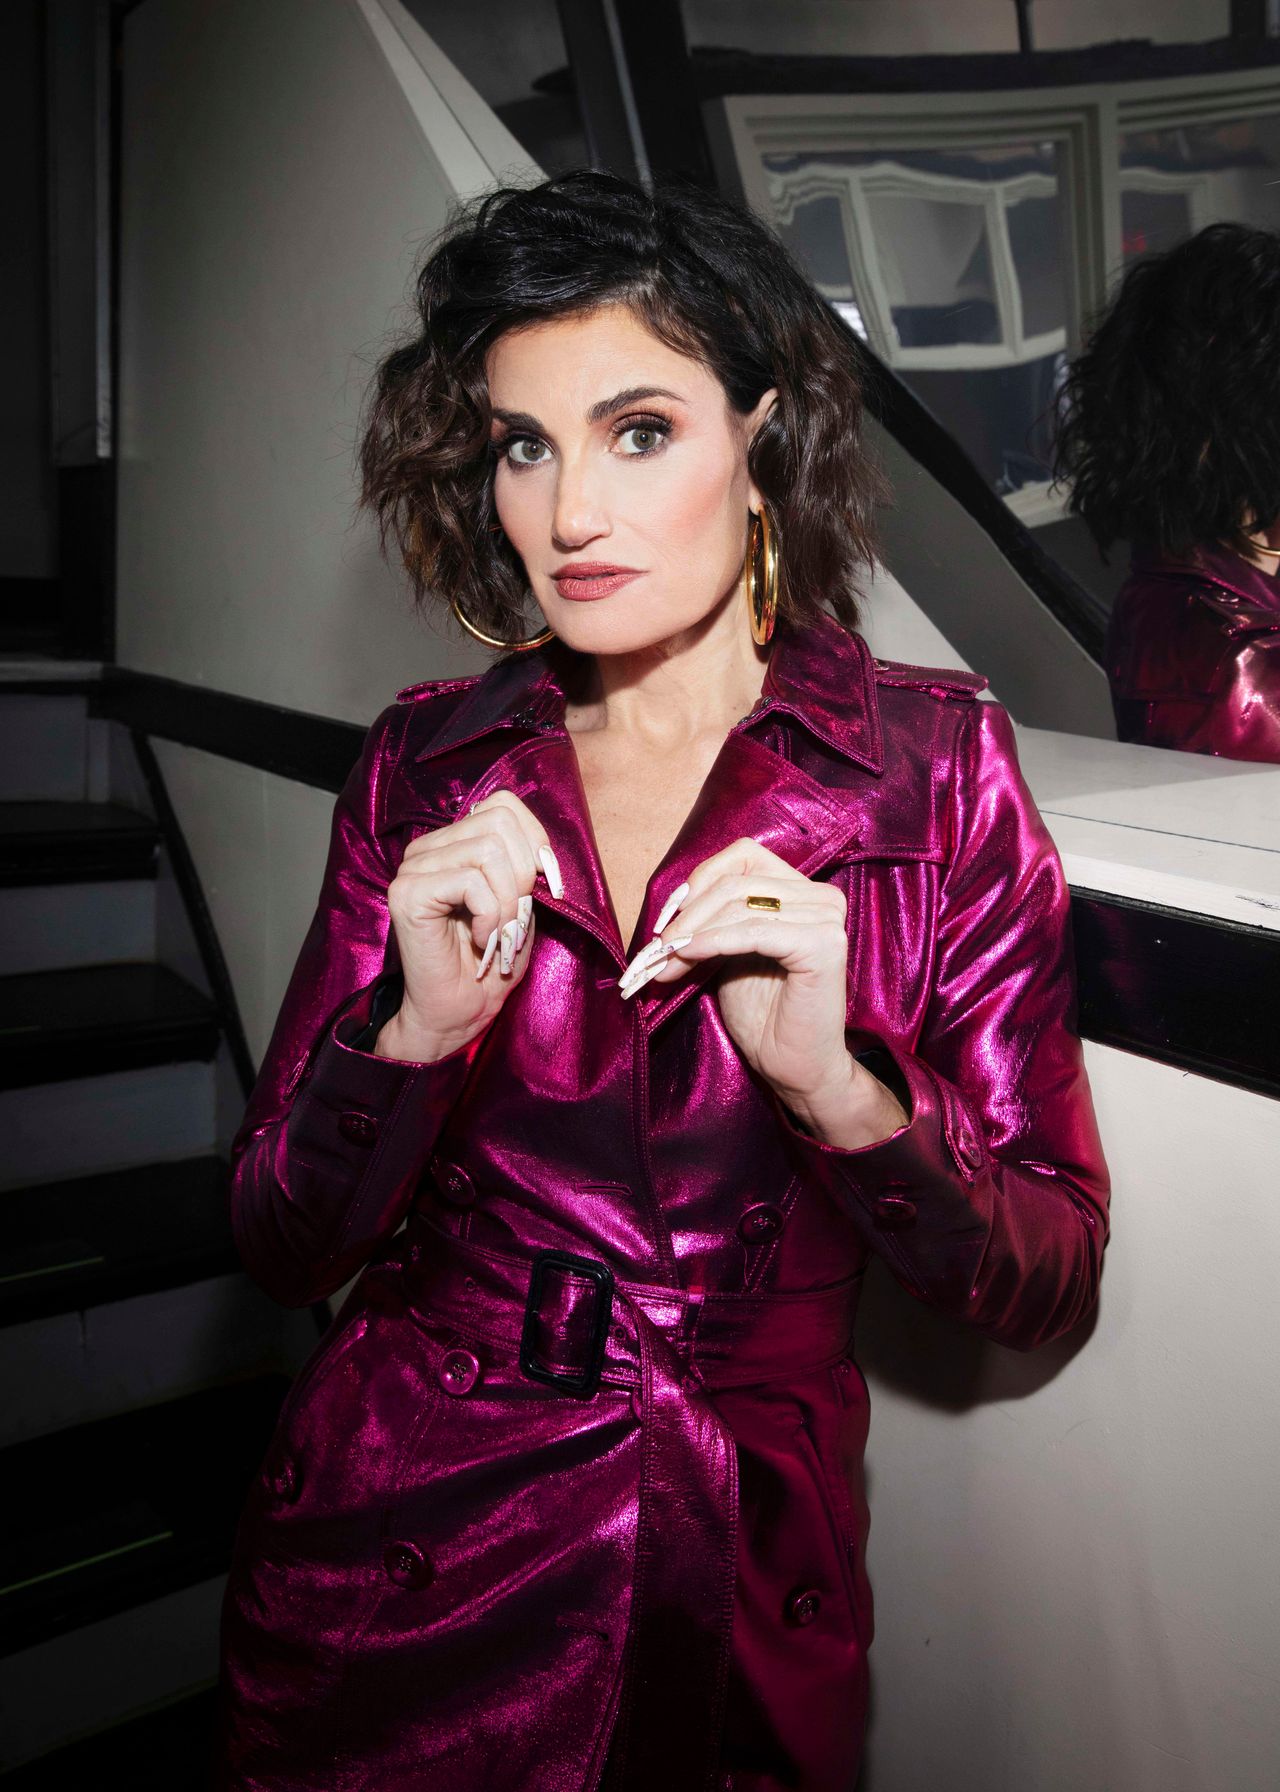 Idina behind the scenes of her new video